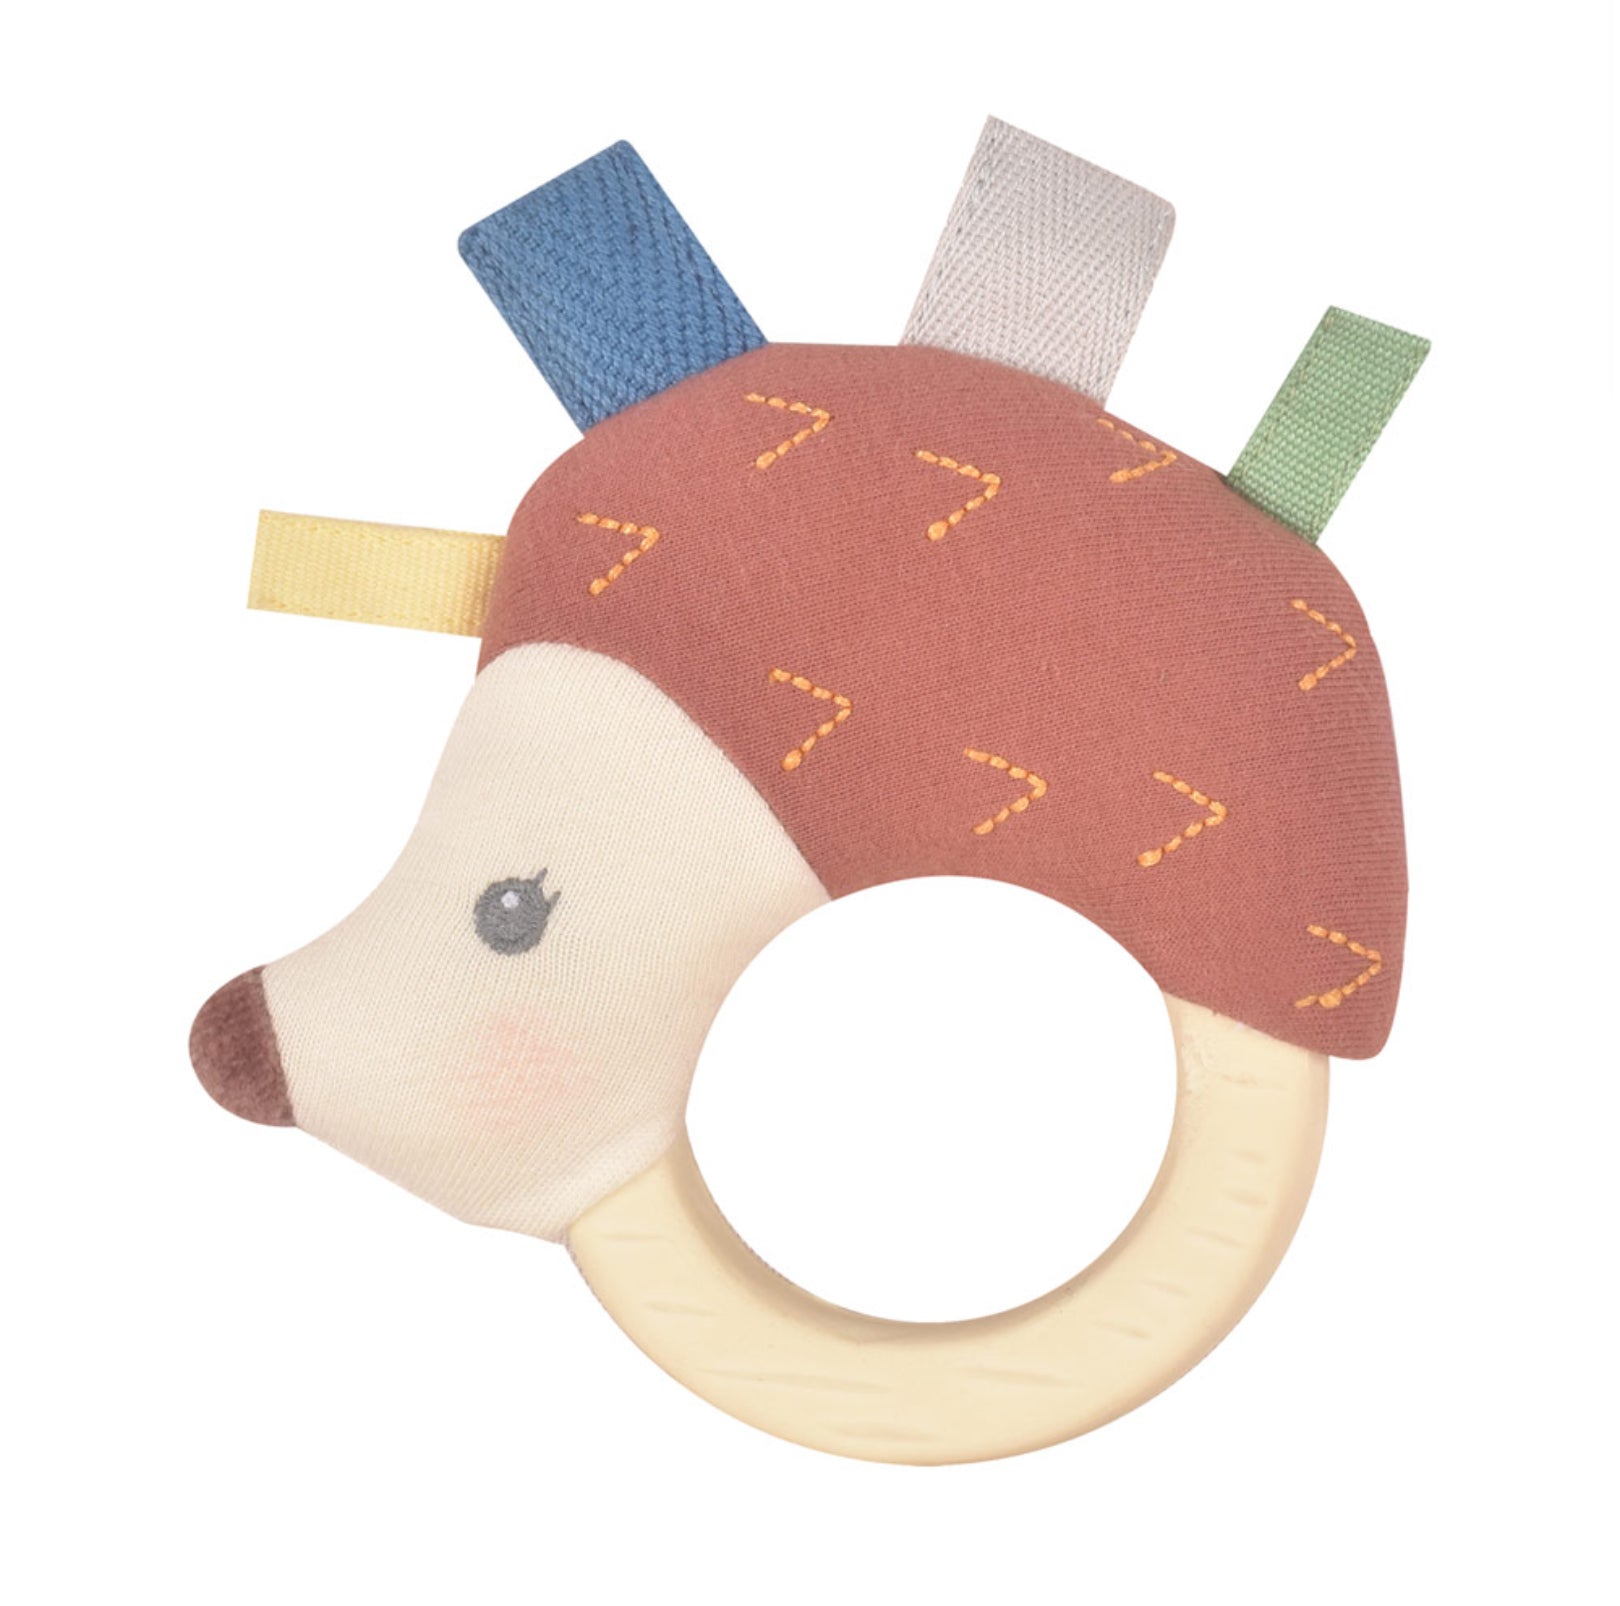 Ethan the Hedgehog Plush Rattle with Rubber Teether from Tikiri